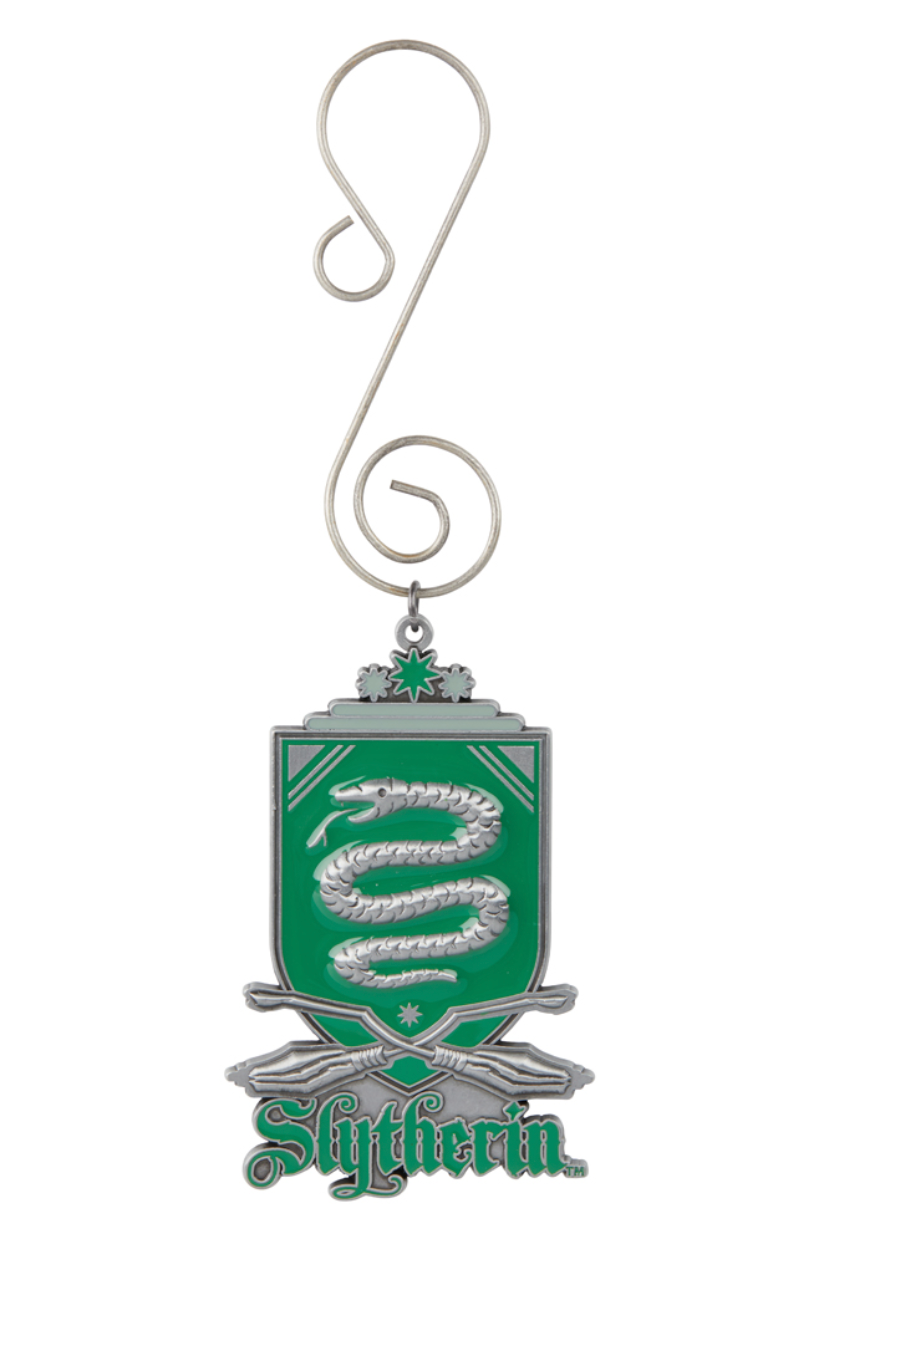 Universal Studios Harry Potter Slytherin Quidditch Shield Ornament New with Tag